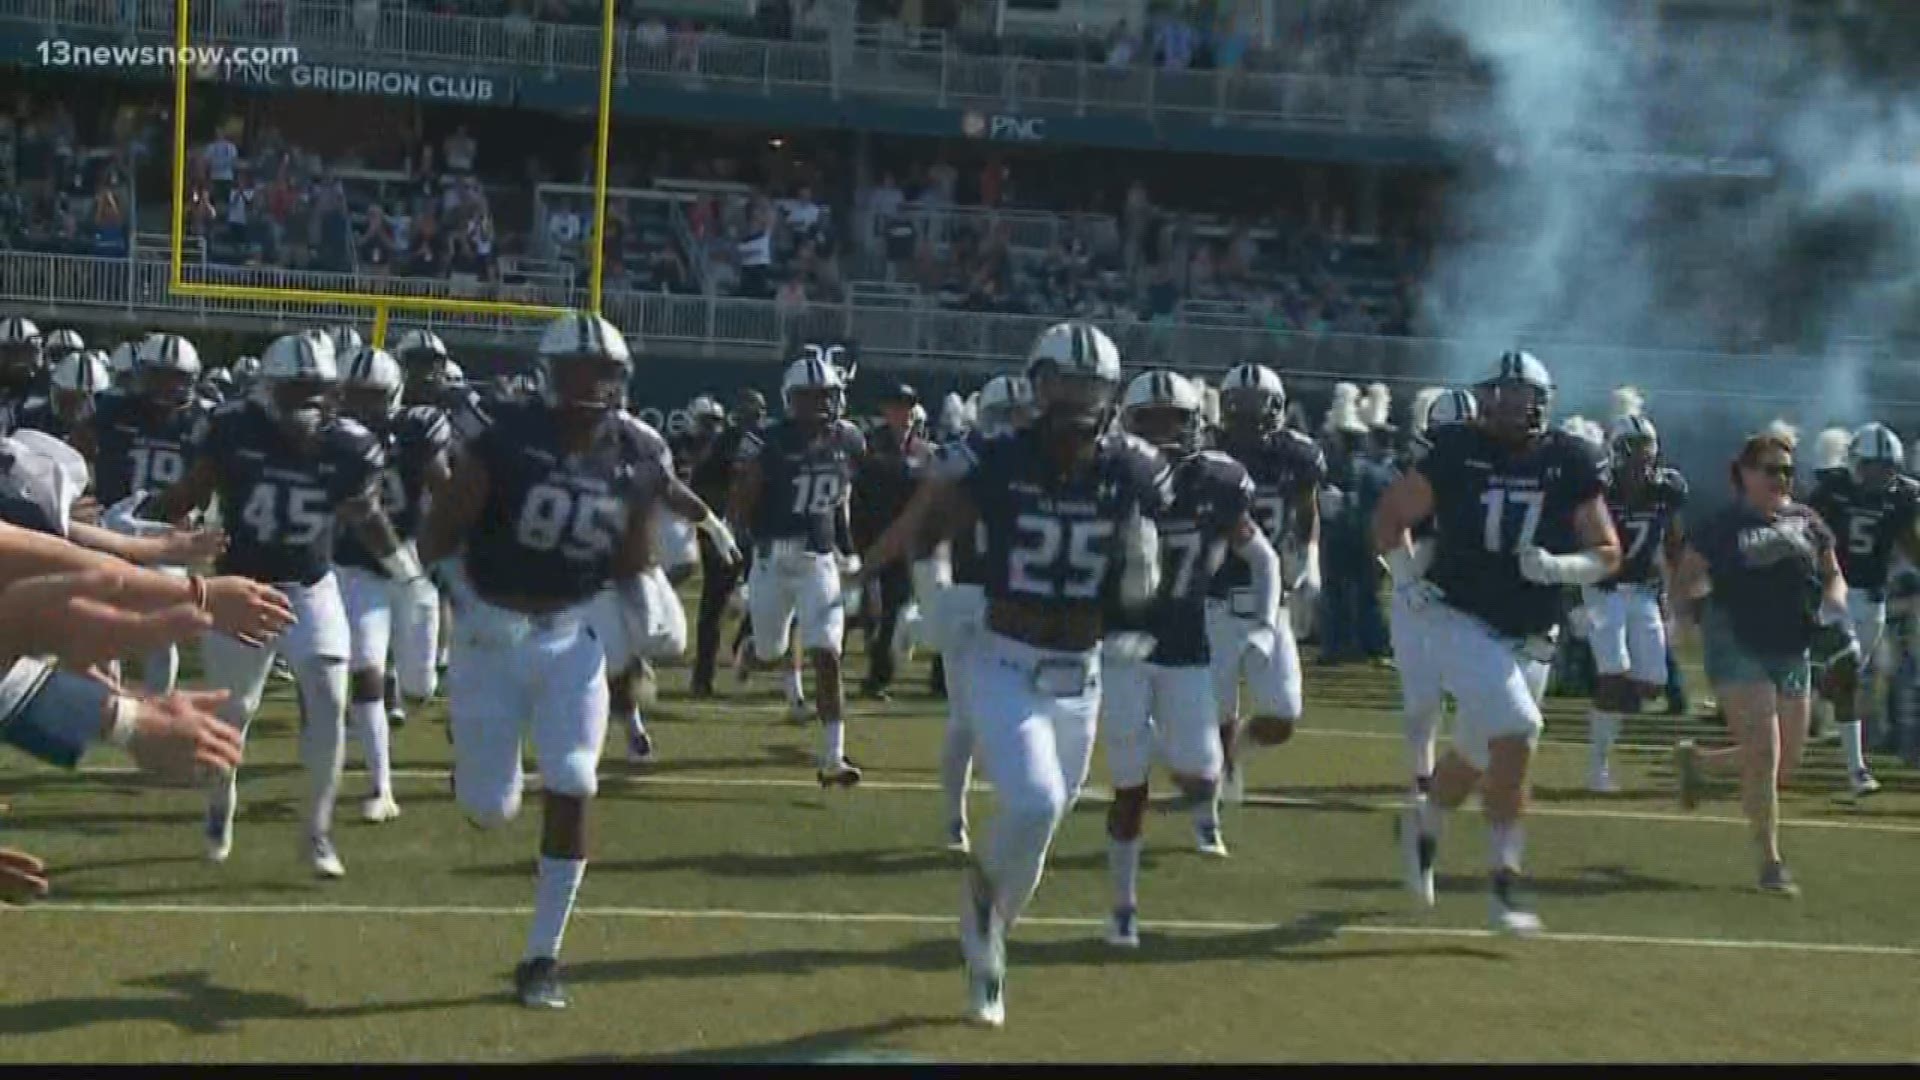 With preseason camp just 2 weeks away, ODU football and coach Bobby Wilder take their shot at previewing the season.